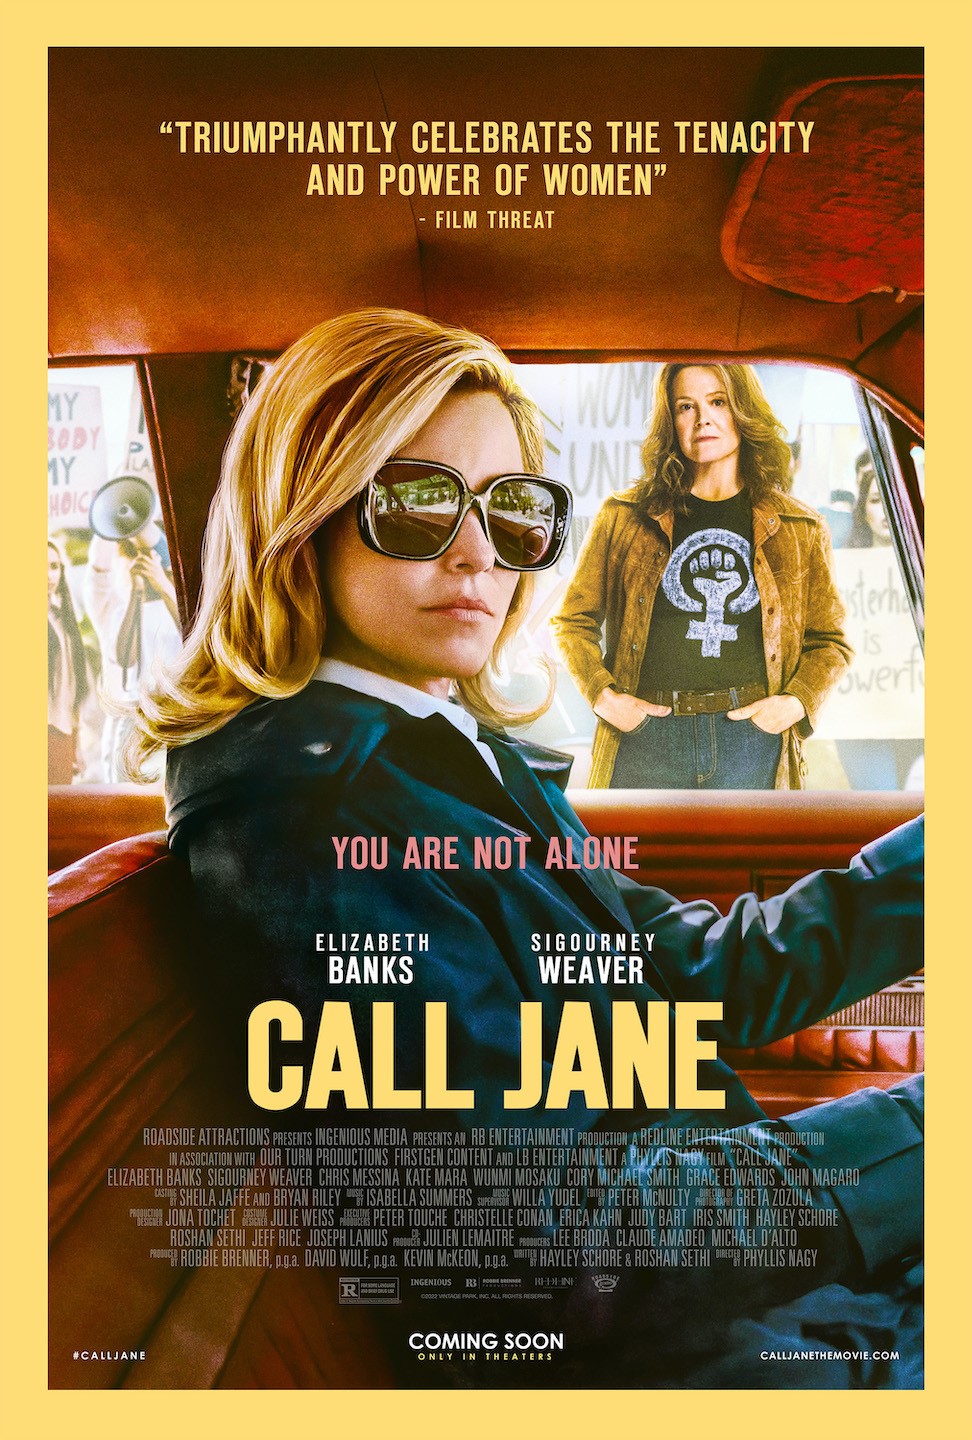 Cover Art for "Call Jane"